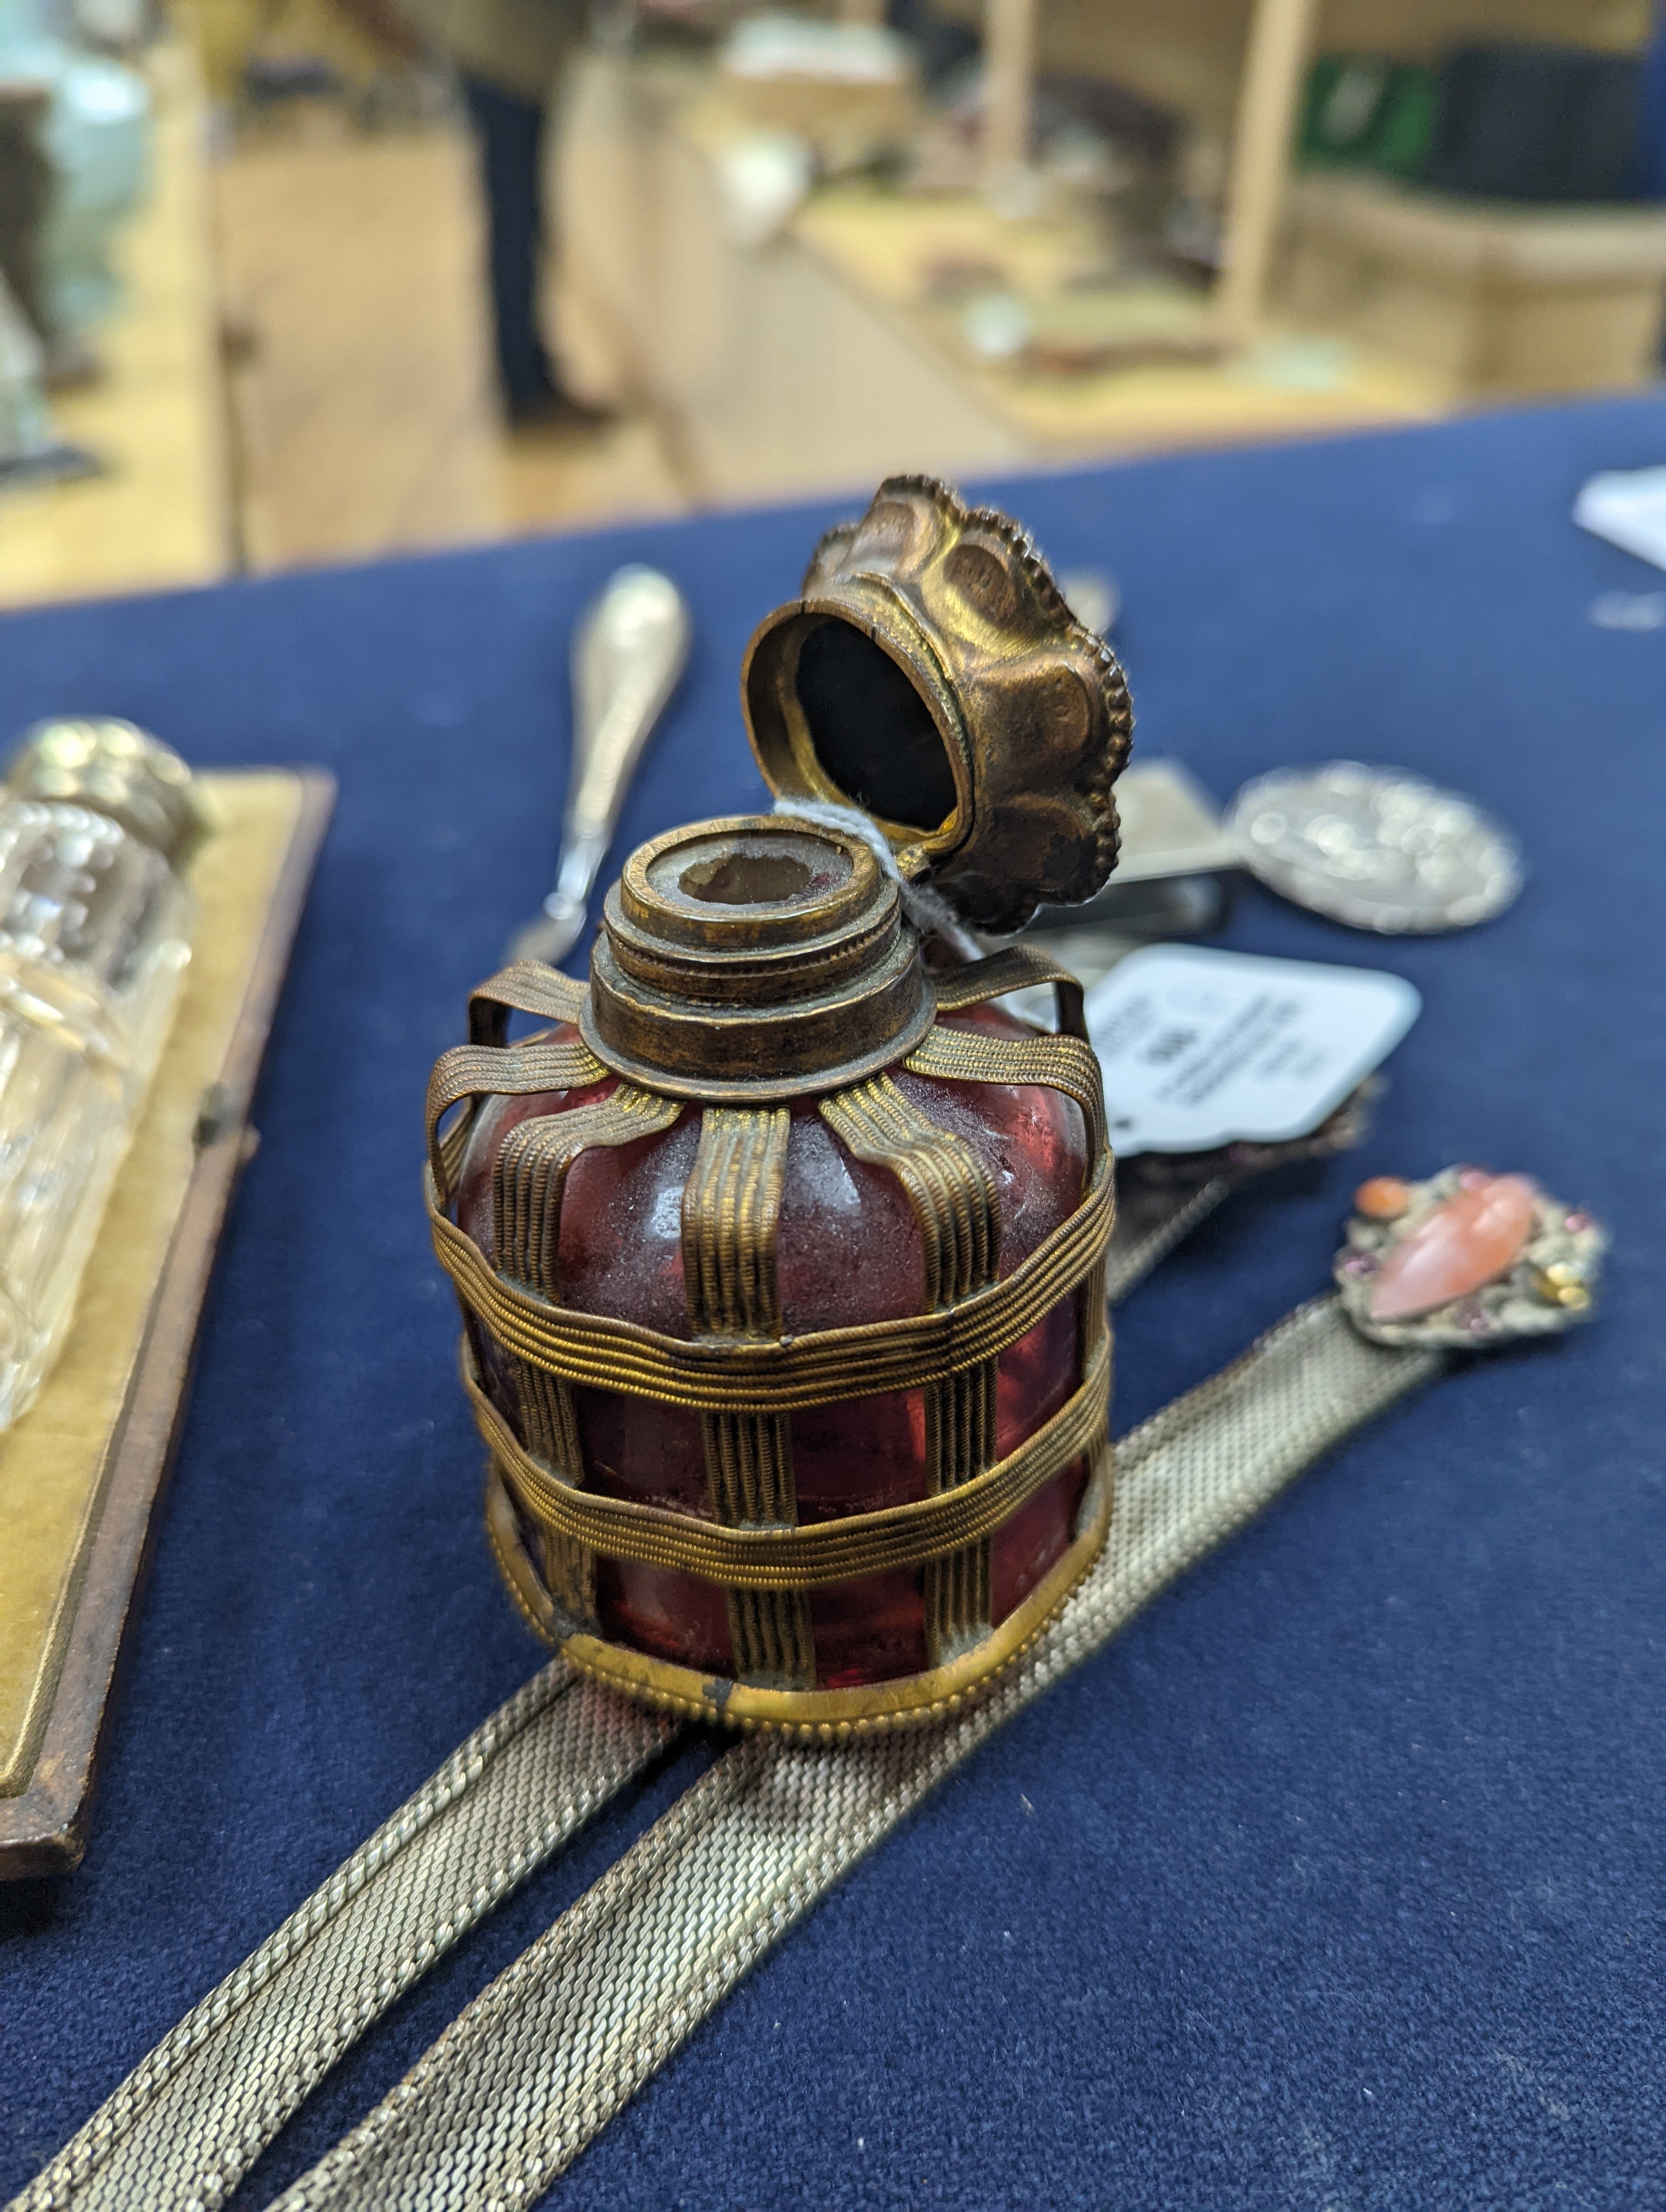 A cased Victorian engraved gilt white metal and coral set double ended scent bottle, 13.4cm, a silver cigar cutter, a belt, a silver buckle, gilt and cranberry perfume bottle, etc.